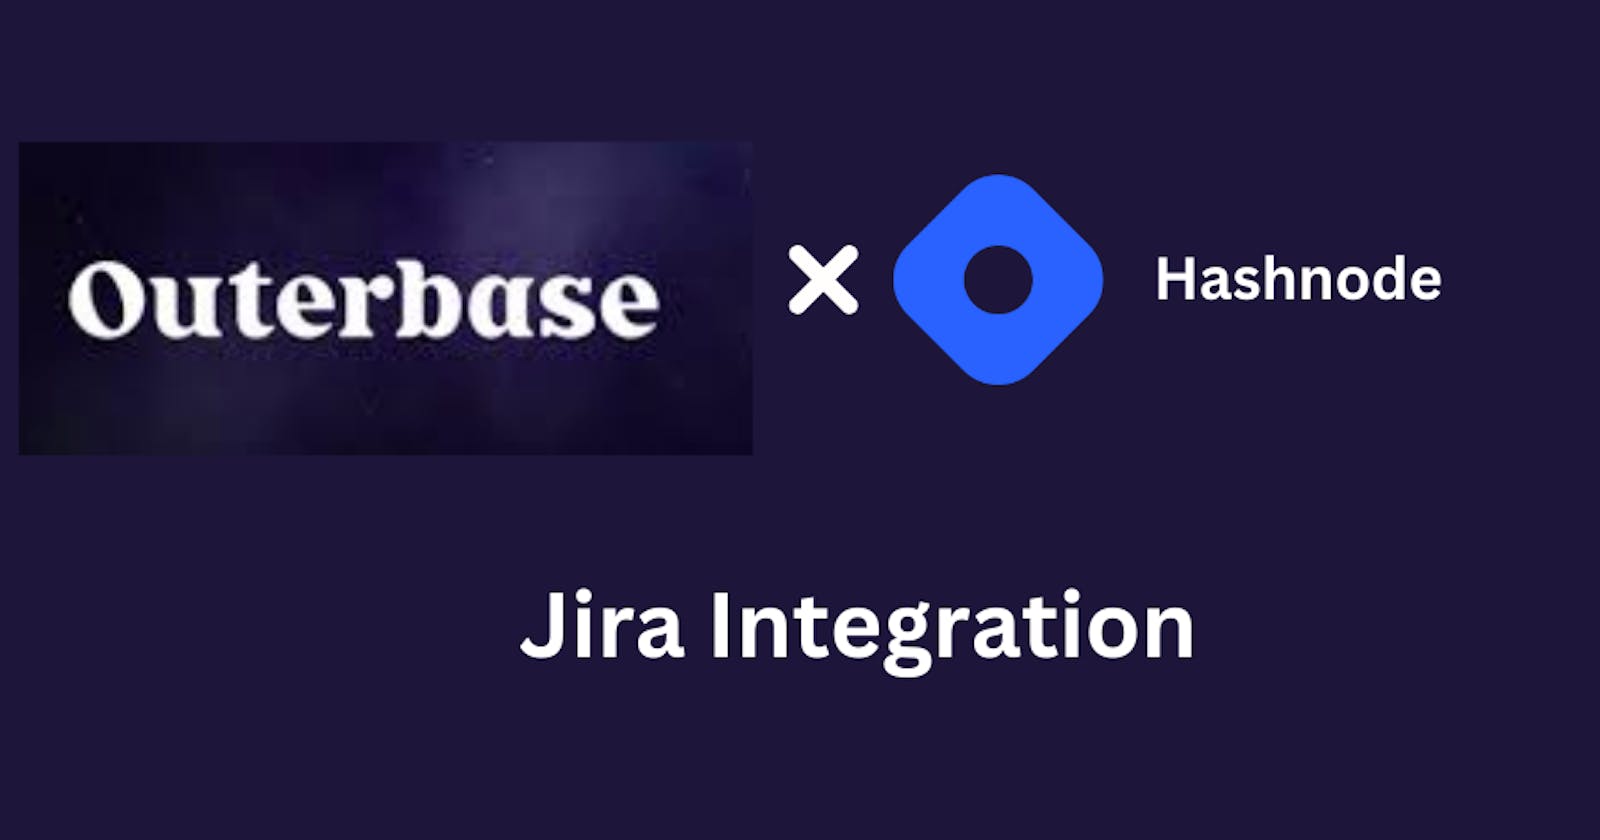 Jira Integration in Outerbase